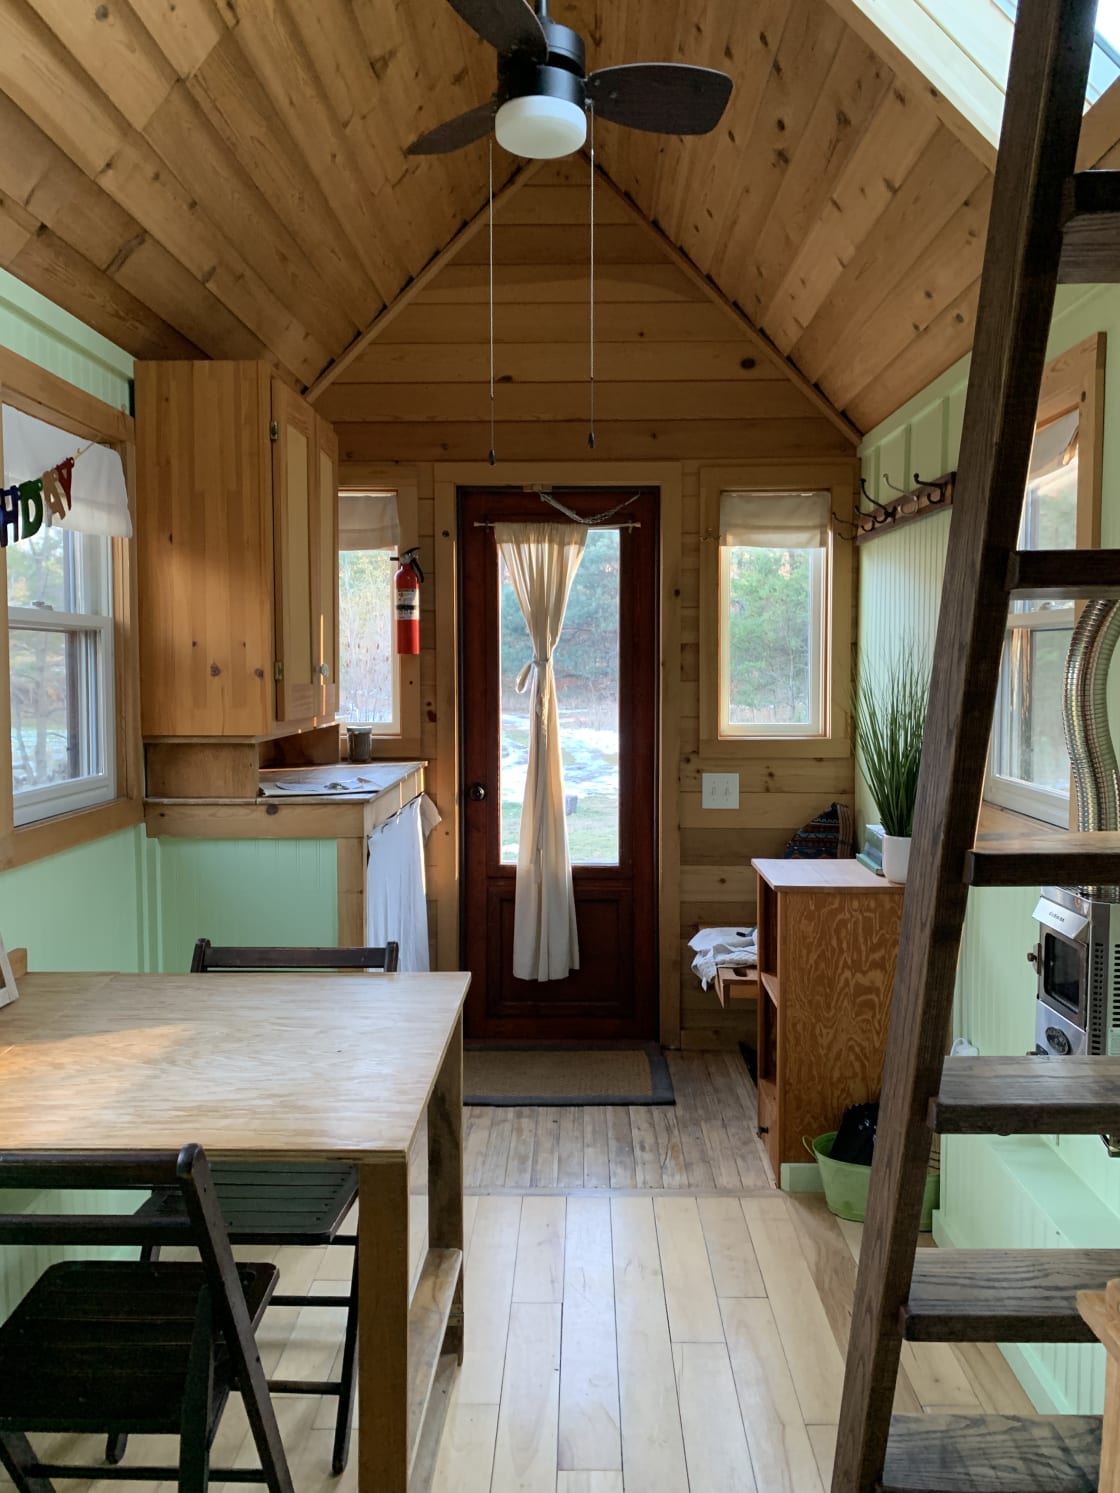 Inside of the tiny house standing in the kitchen.